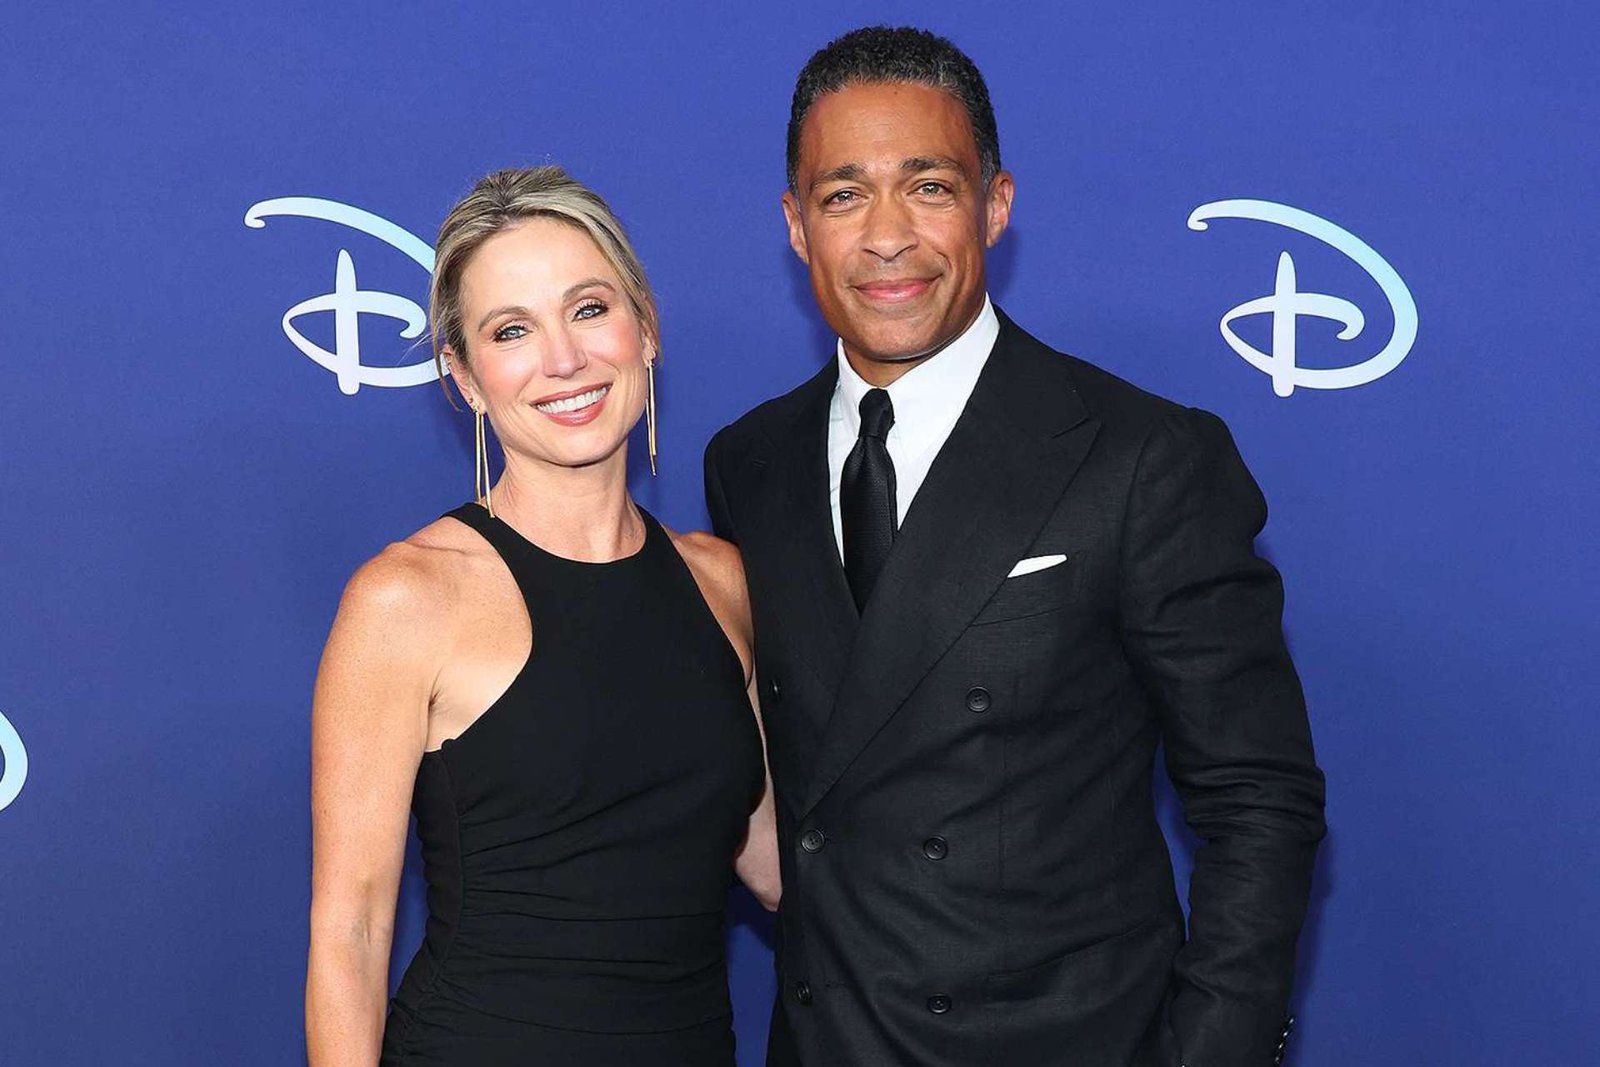 Amy Robach and T.J. Holmes’ Podcast Faces Decline In Ratings One Month After Debut